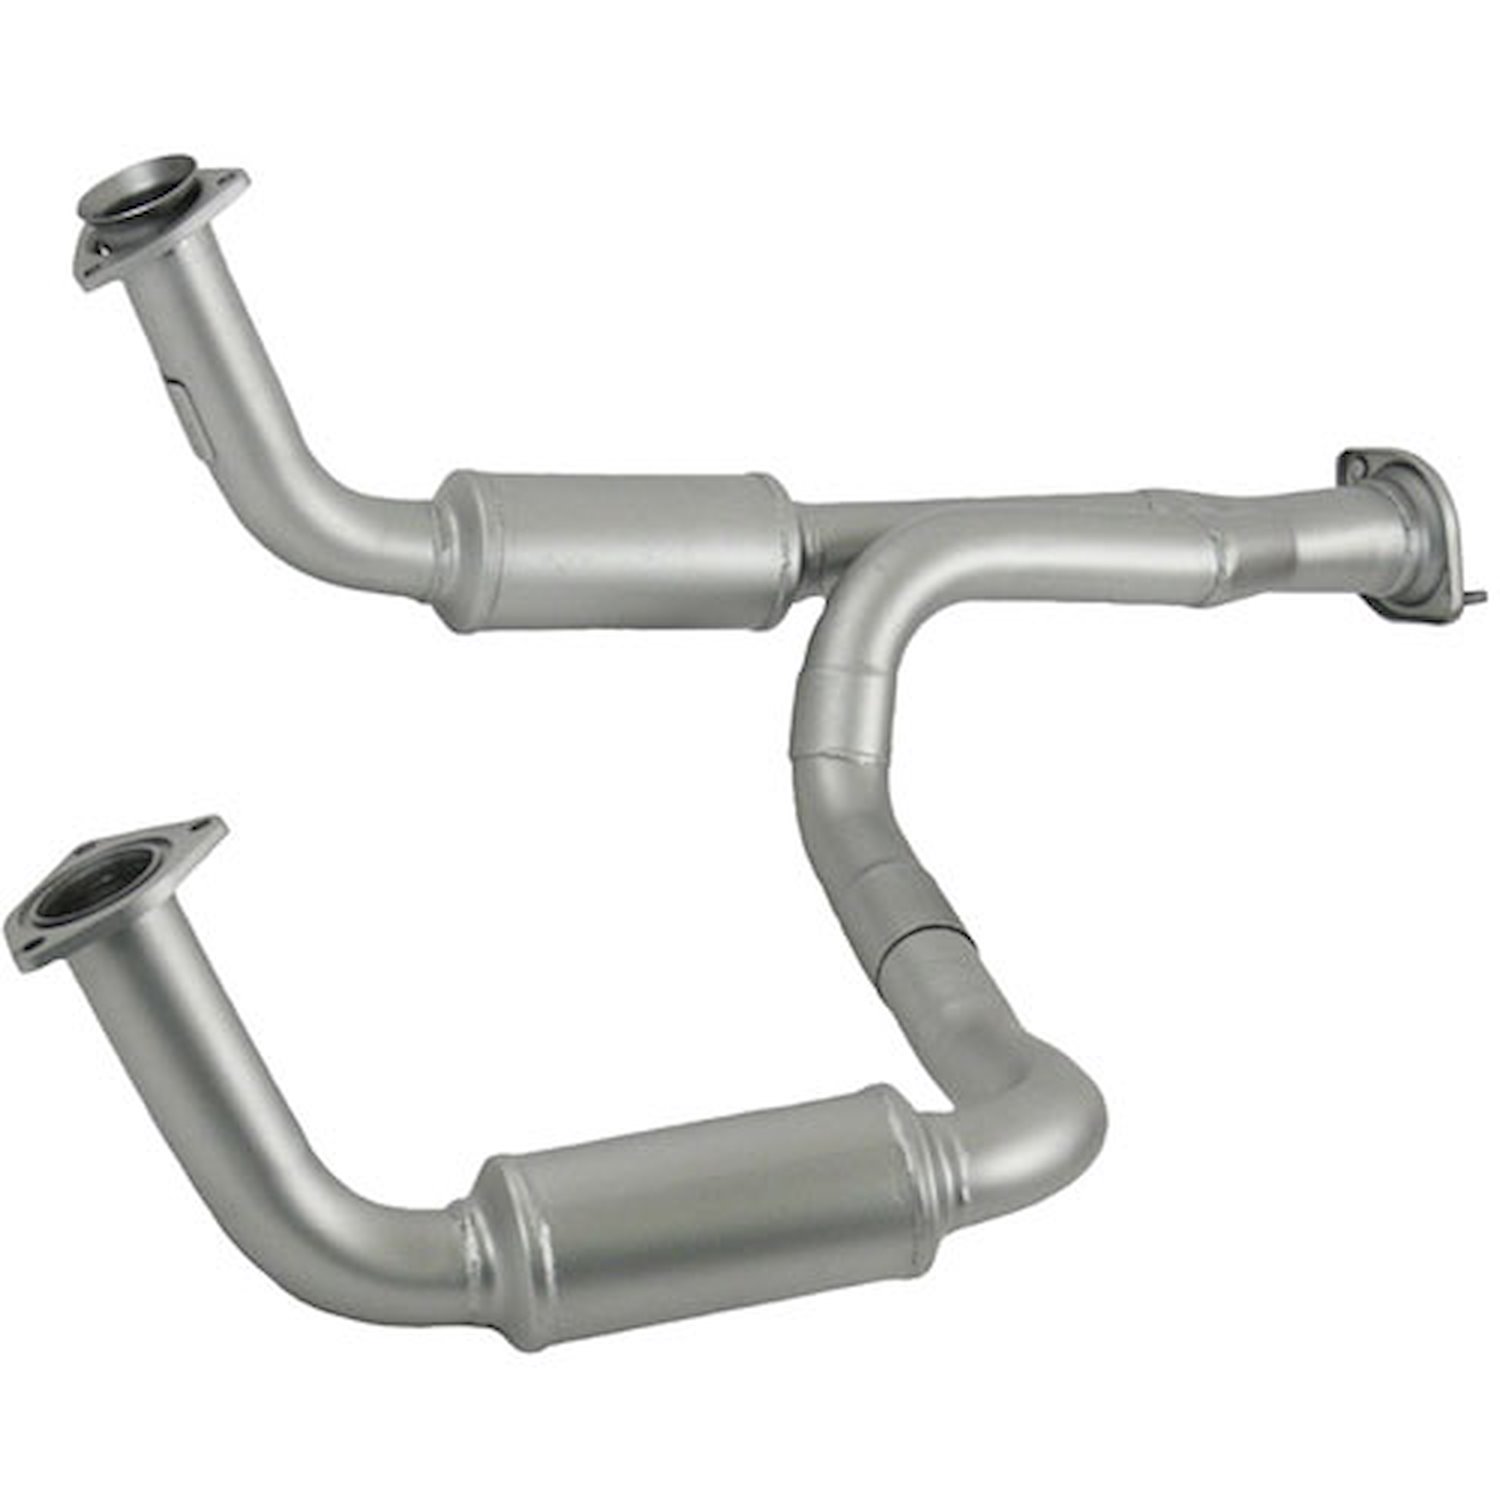 Direct-Fit Catalytic Converter 1999-07 Chevy & GMC Pickup & SUV